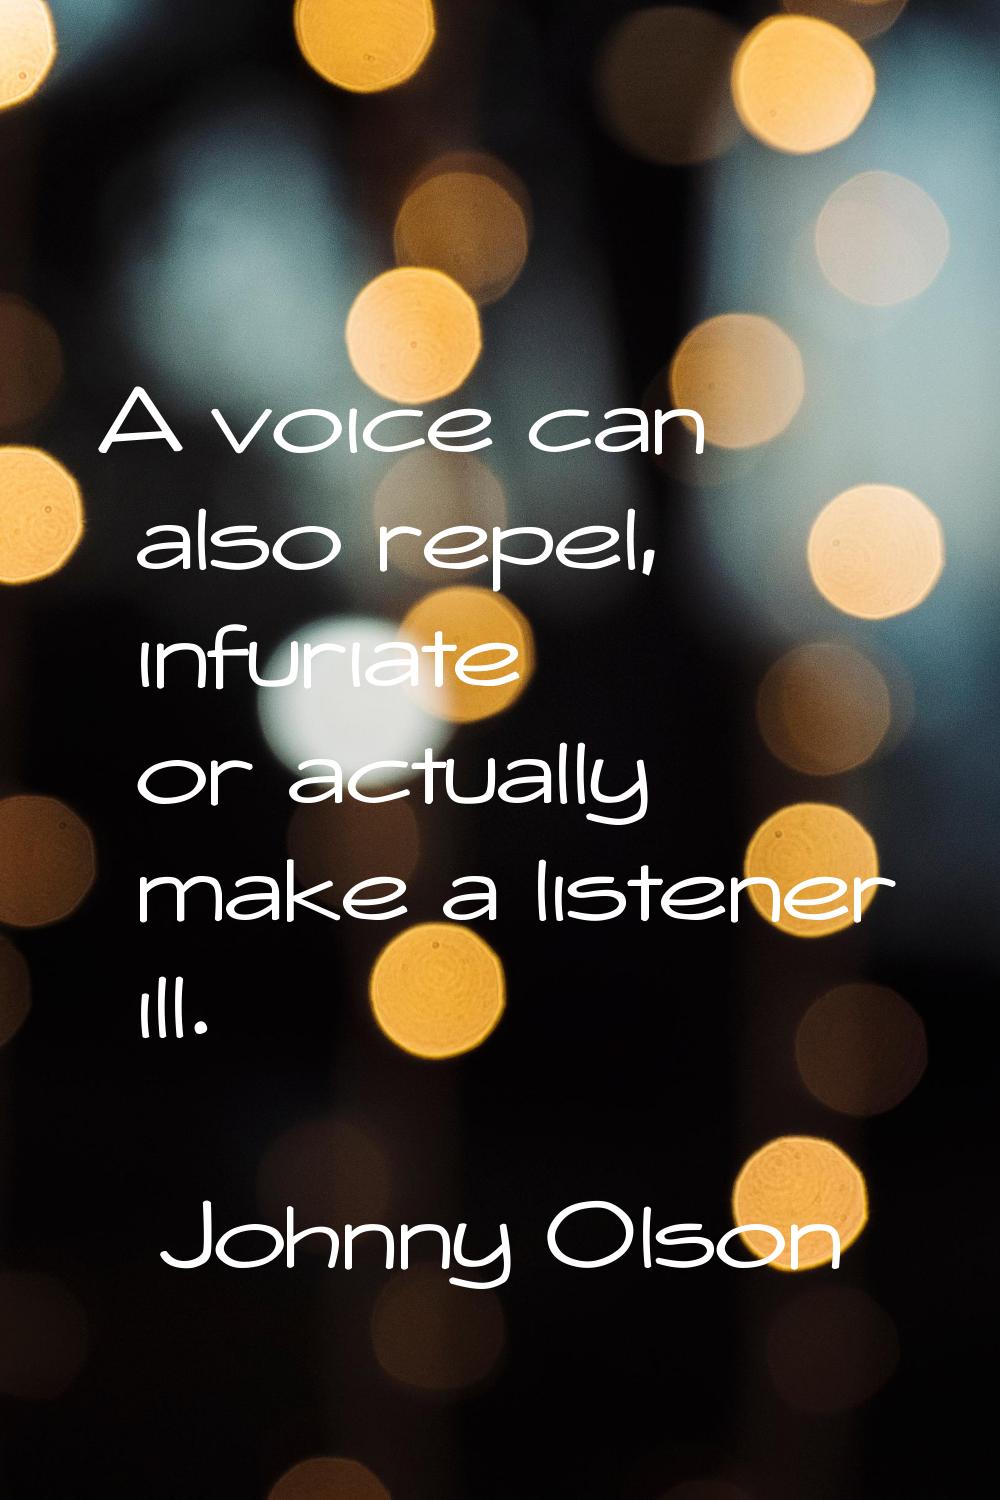 A voice can also repel, infuriate or actually make a listener ill.